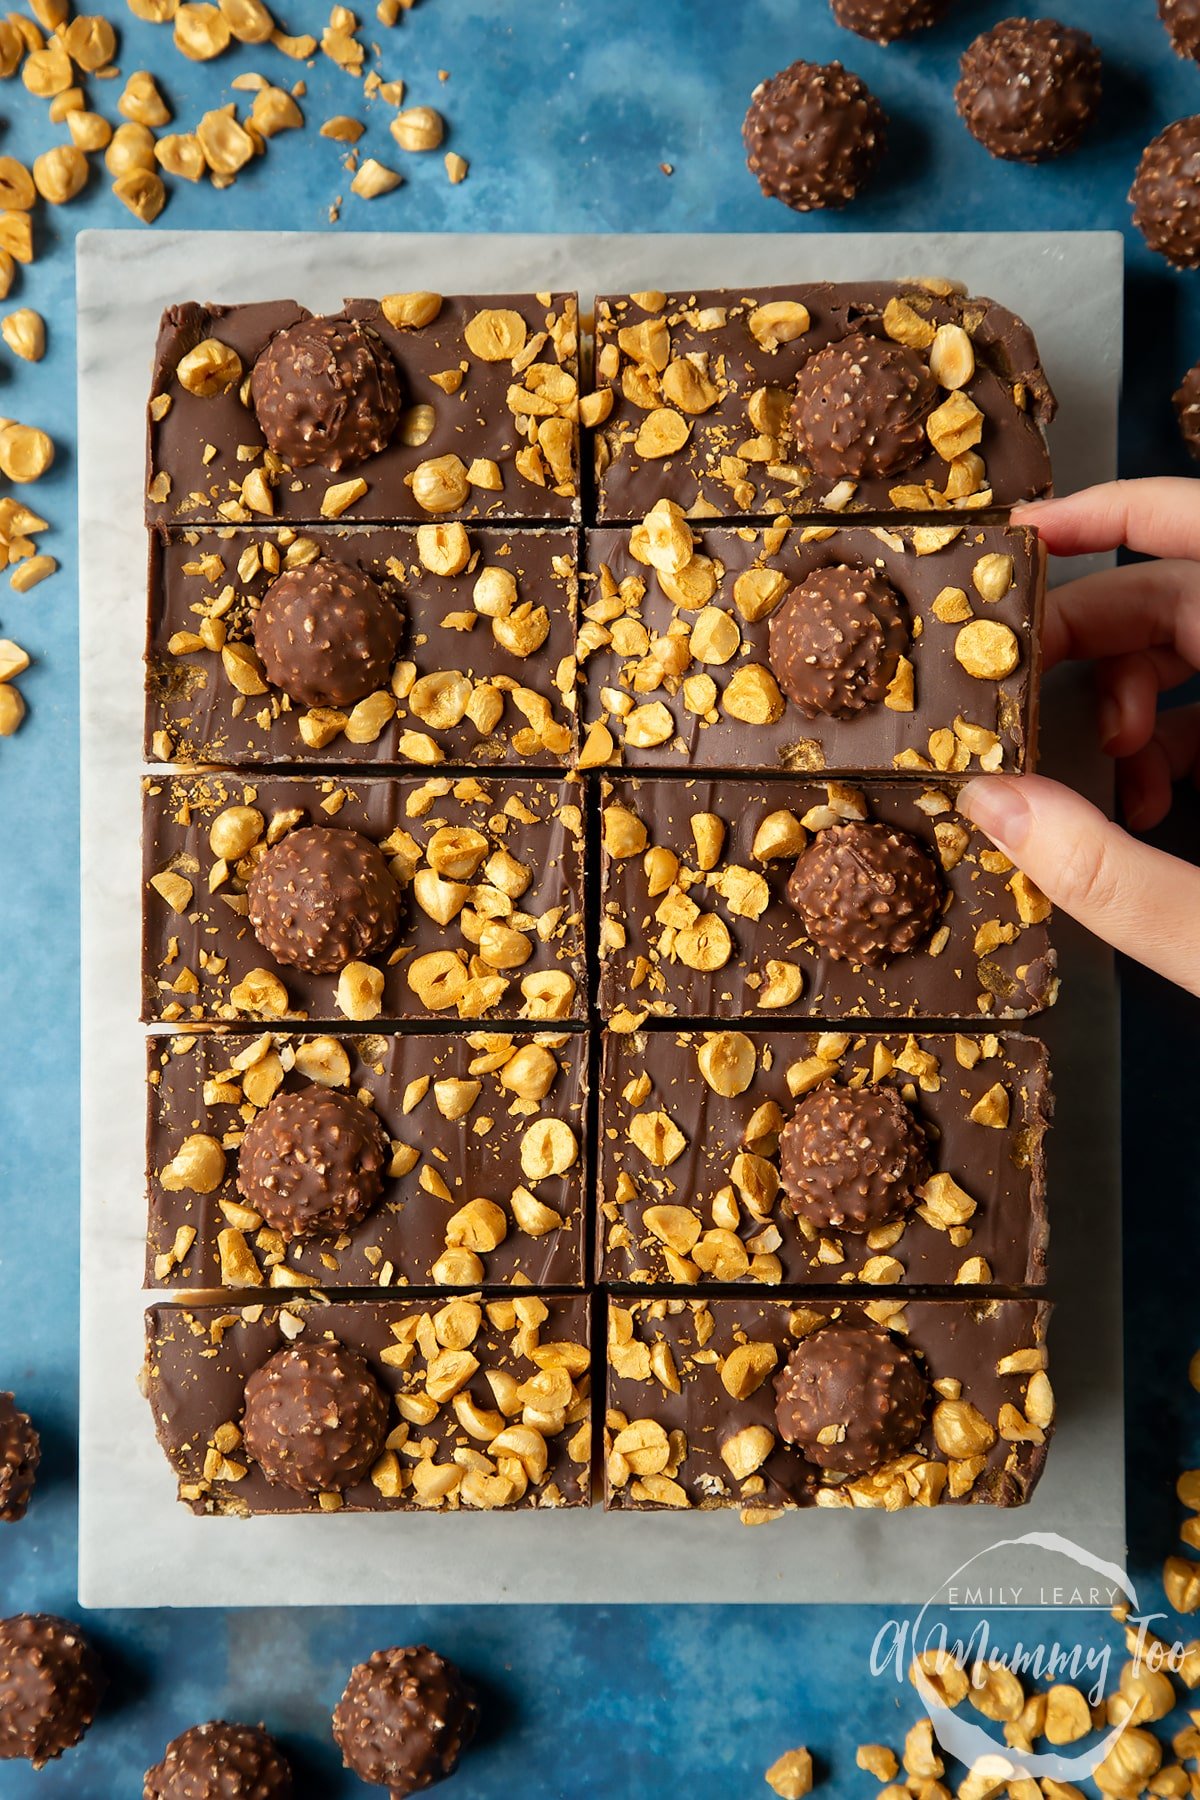 Marble board with Ferrero Rocher slices. A hand reaches for one.